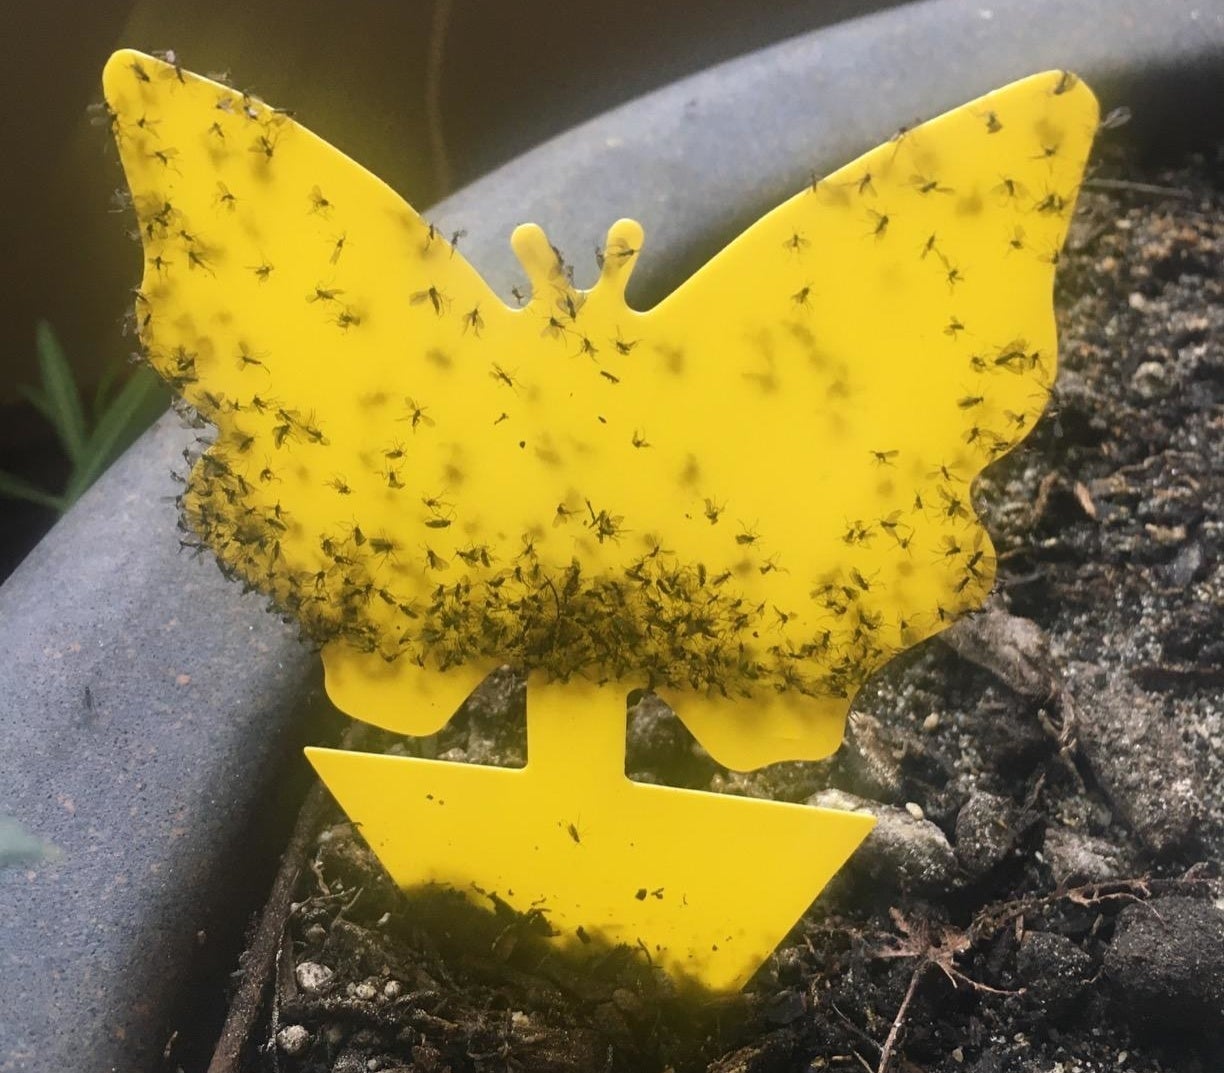 Reviewer showing how many bugs were caught by yellow butterfly-shaped trap